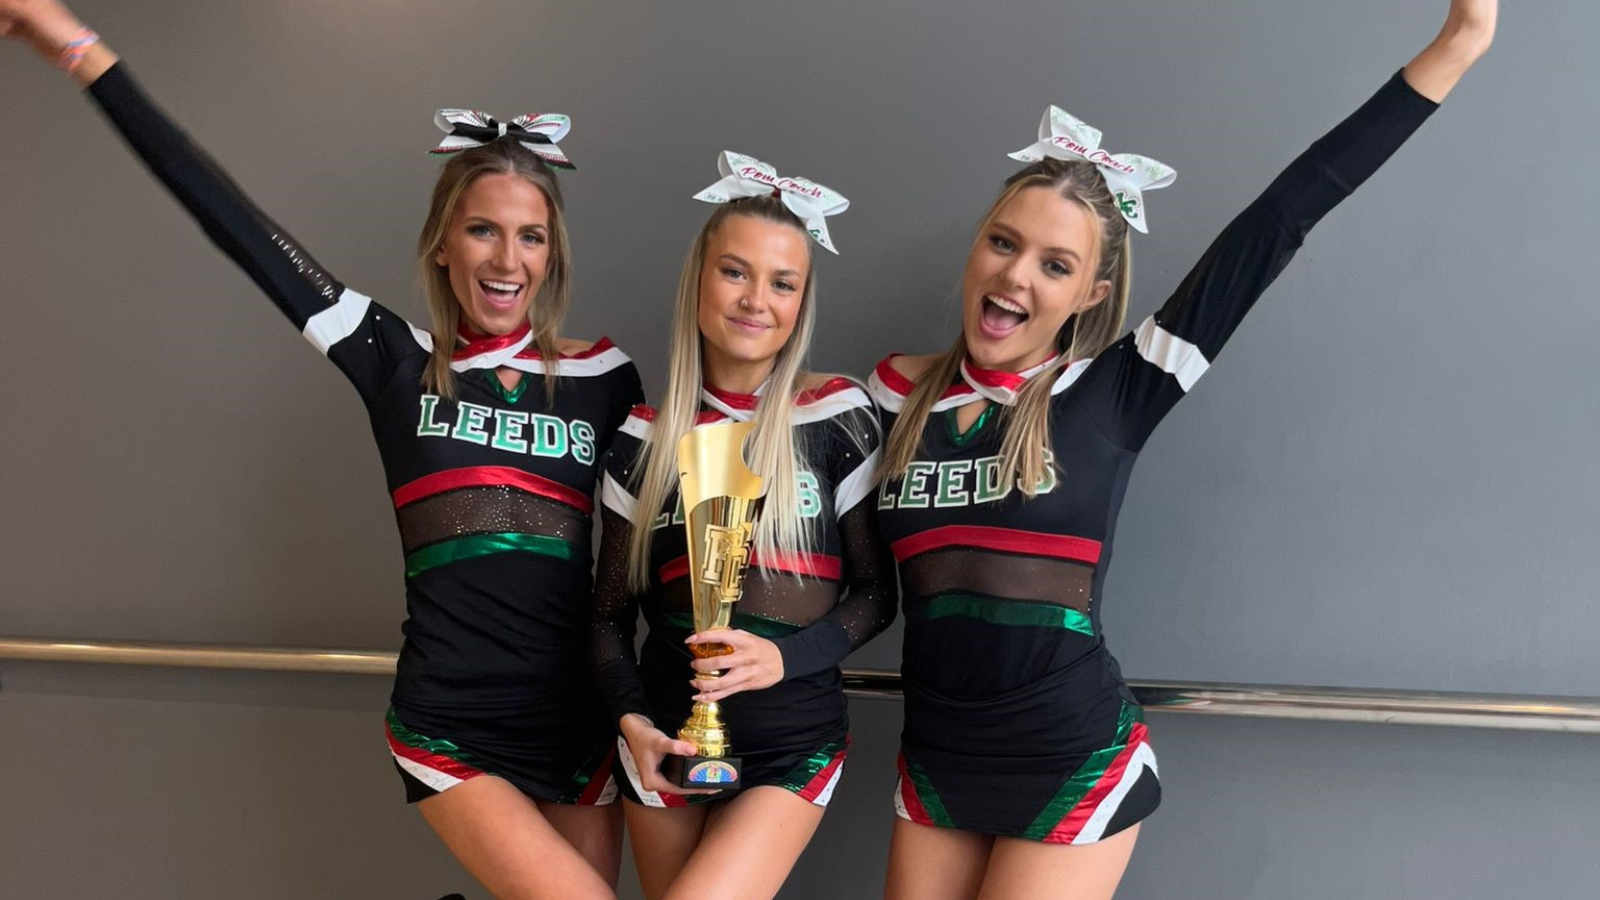 Students in cheerleading society with an award